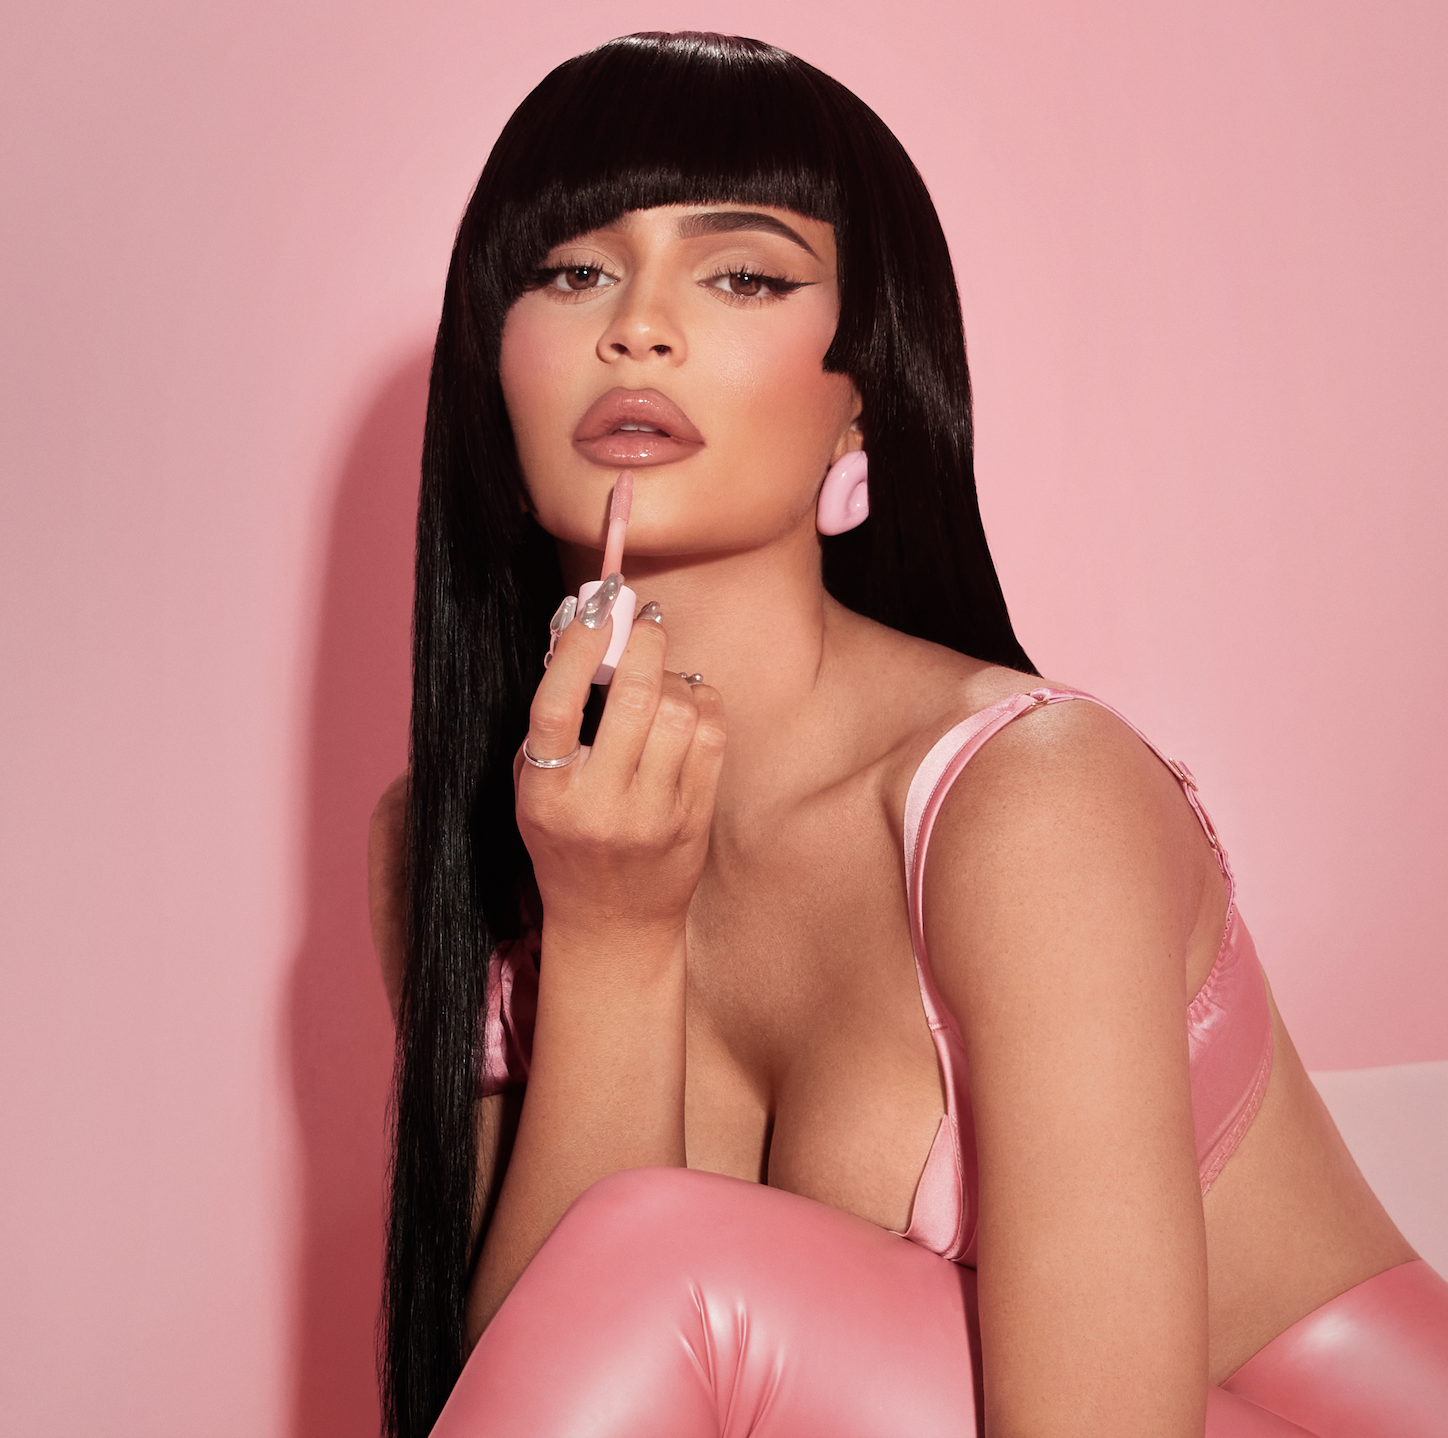 Kylie Jenner Just Relaunched Cosmetics With All New Products - Lip Kit